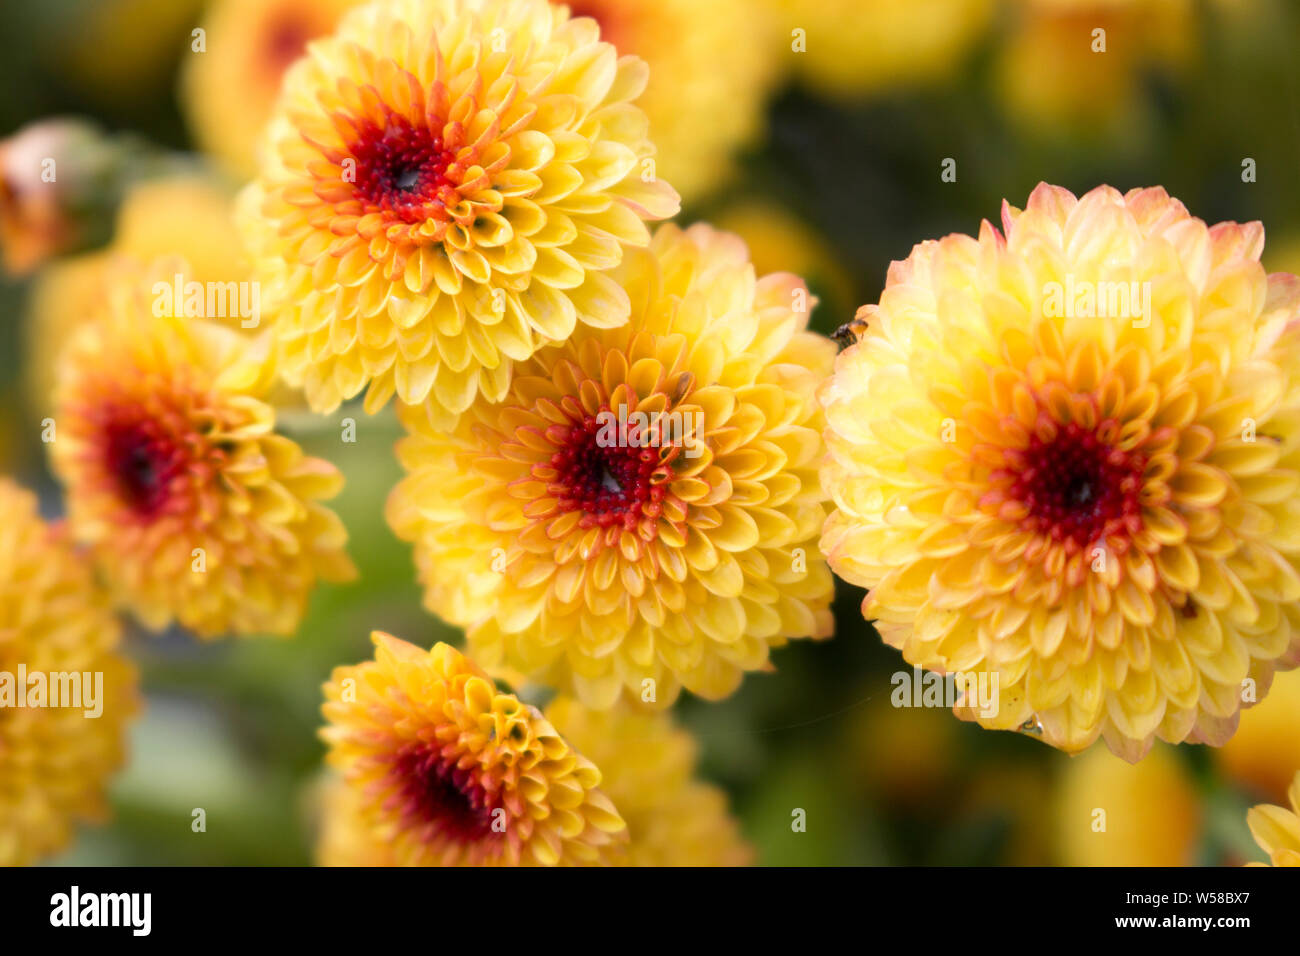 Several blooming Lollipop Yellow Chrysanthemum flowers with water drops in center from morning dew. Blurry background. Stock Photo